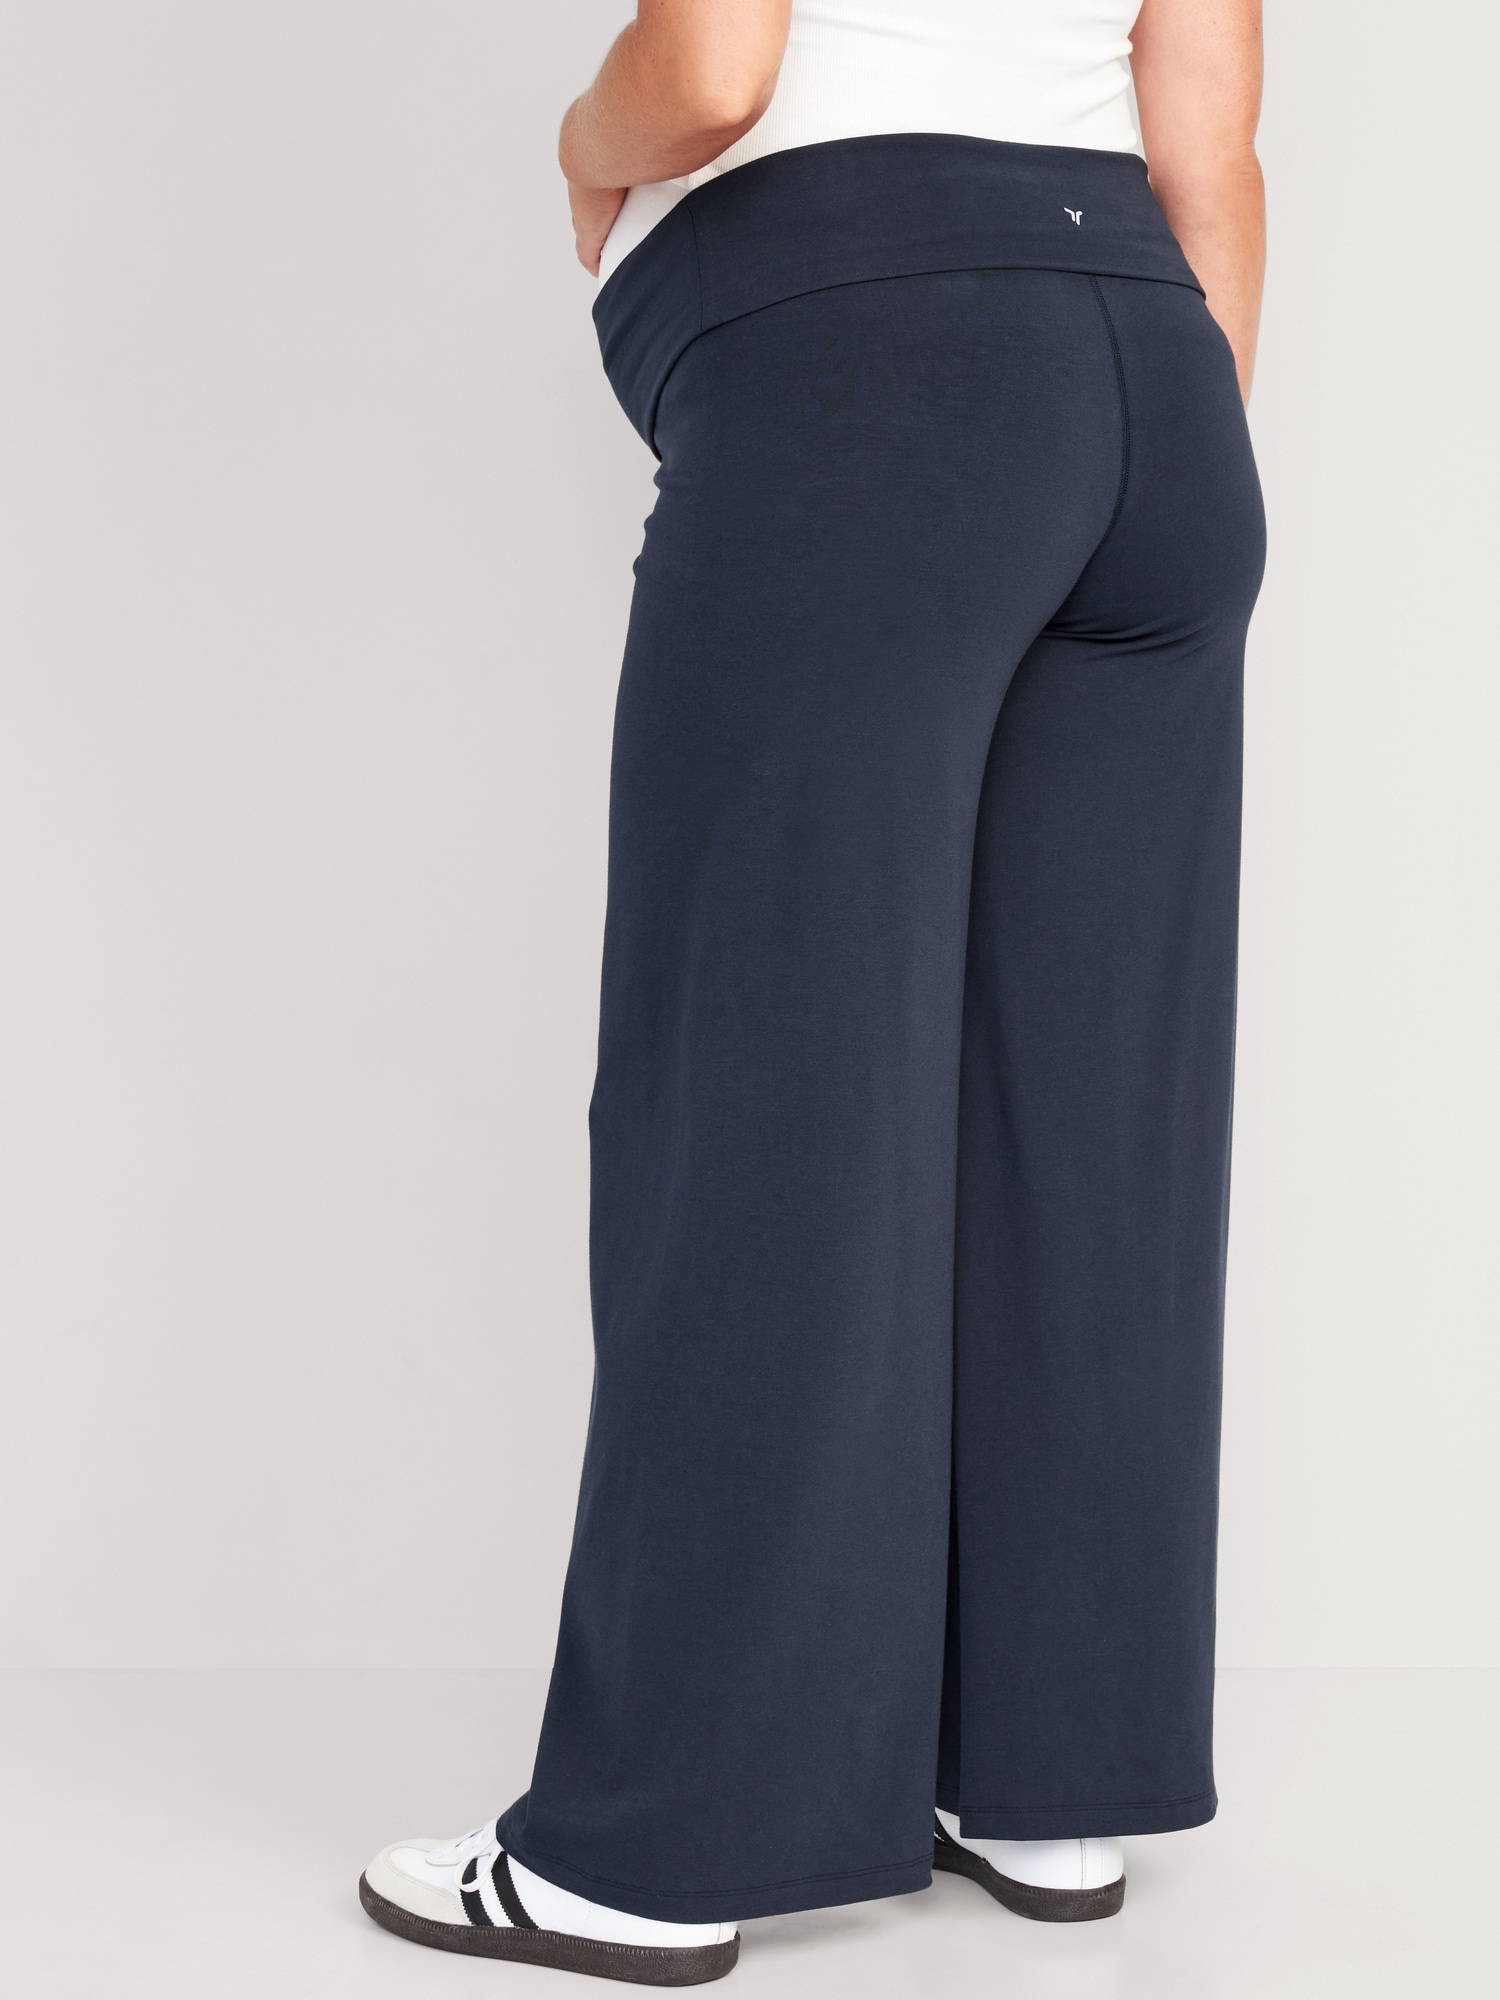 Qualitas Polywool Parallel Leg Maternity Trousers, Navy